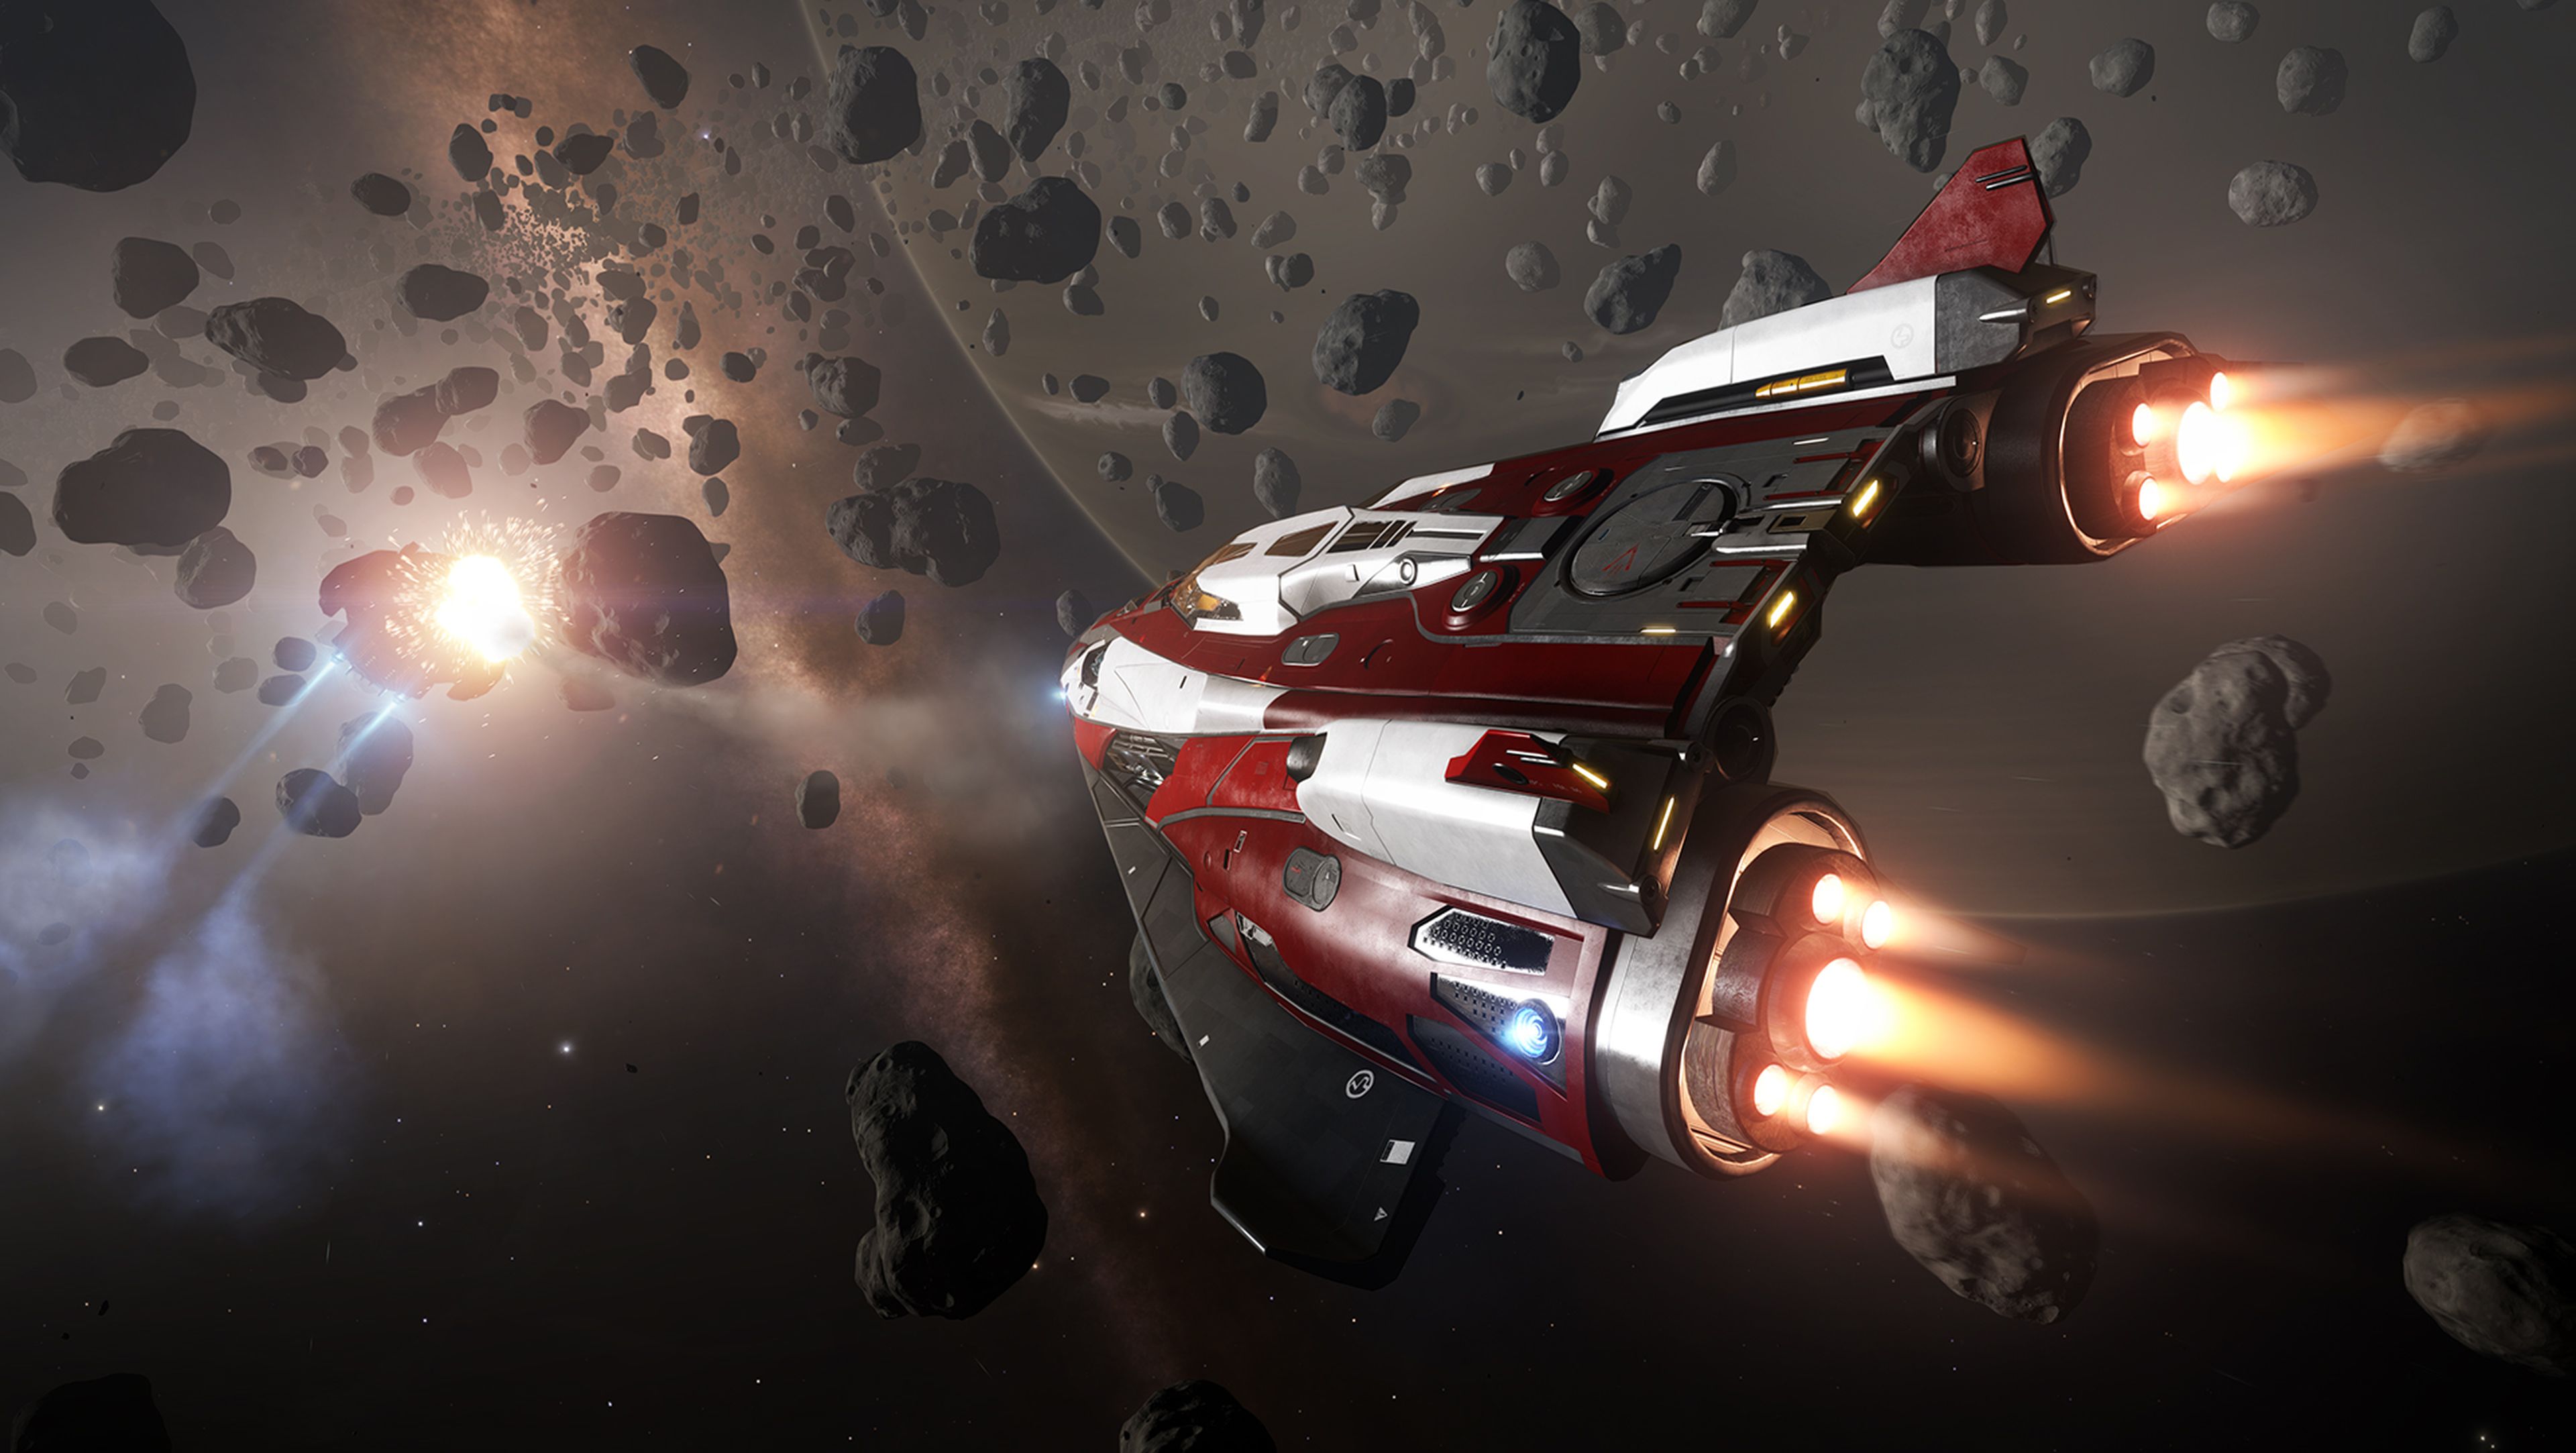 Elite Dangerous has a release date confirmed for Xbox One